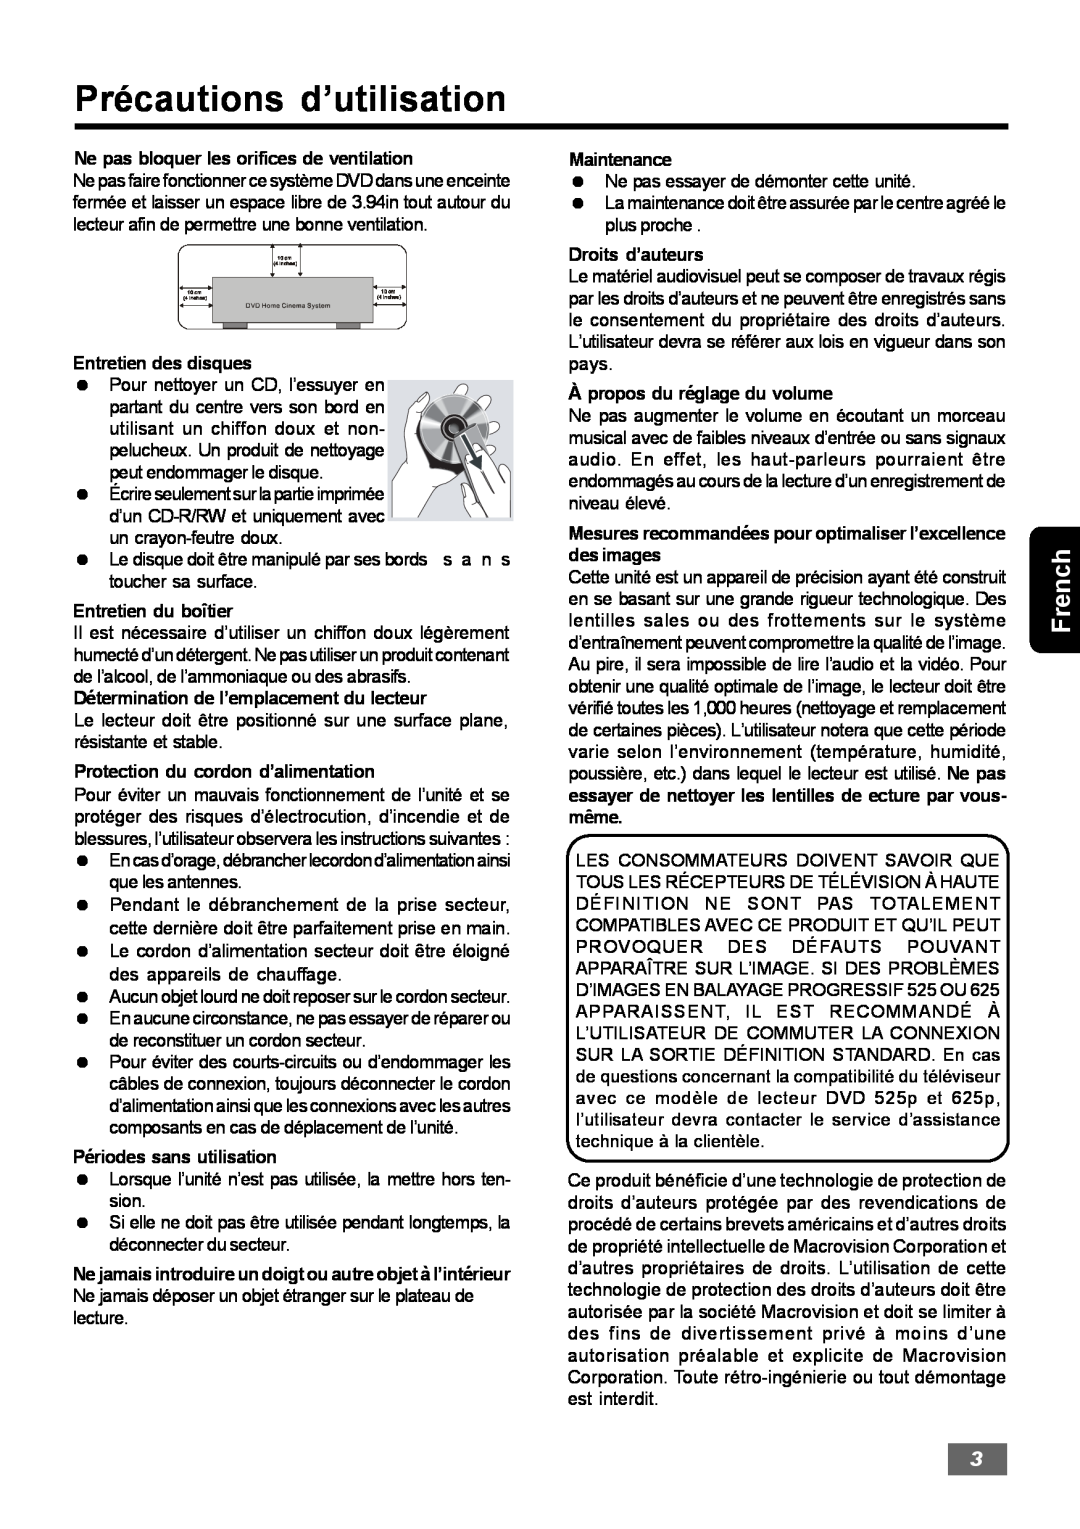 Insignia IS-HTIB102731 owner manual Précautions d’utilisation, French 